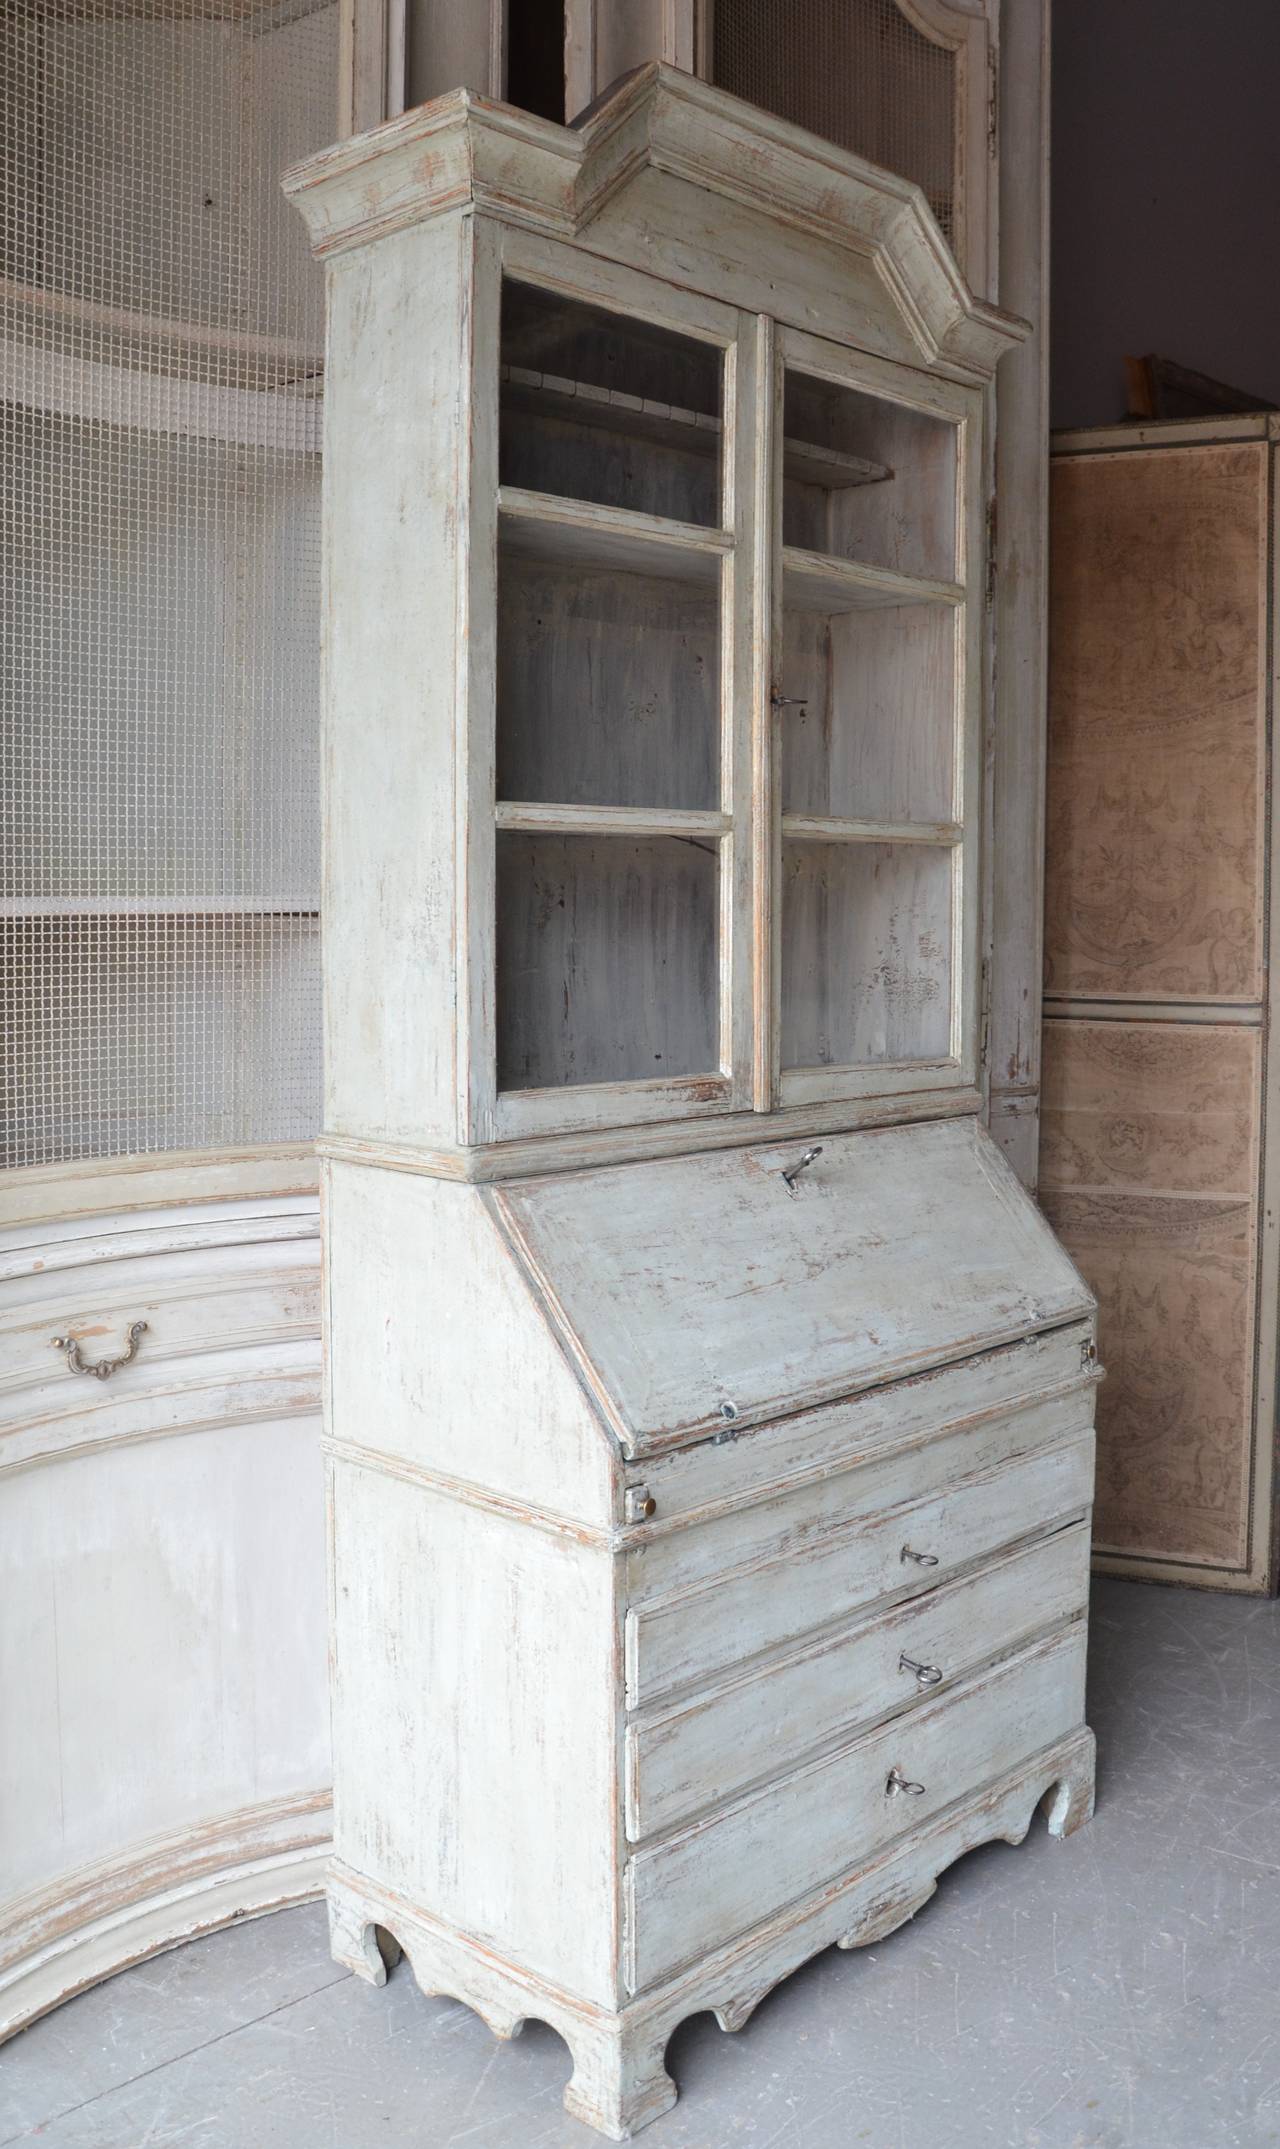 A very fine example of 18th century large secretaire cabinet of transition from Rococo to Gustavian period with a high arching pediment cornice and rare vitrine glass display bookcase. The fall front desk with multitude of drawers and compartments